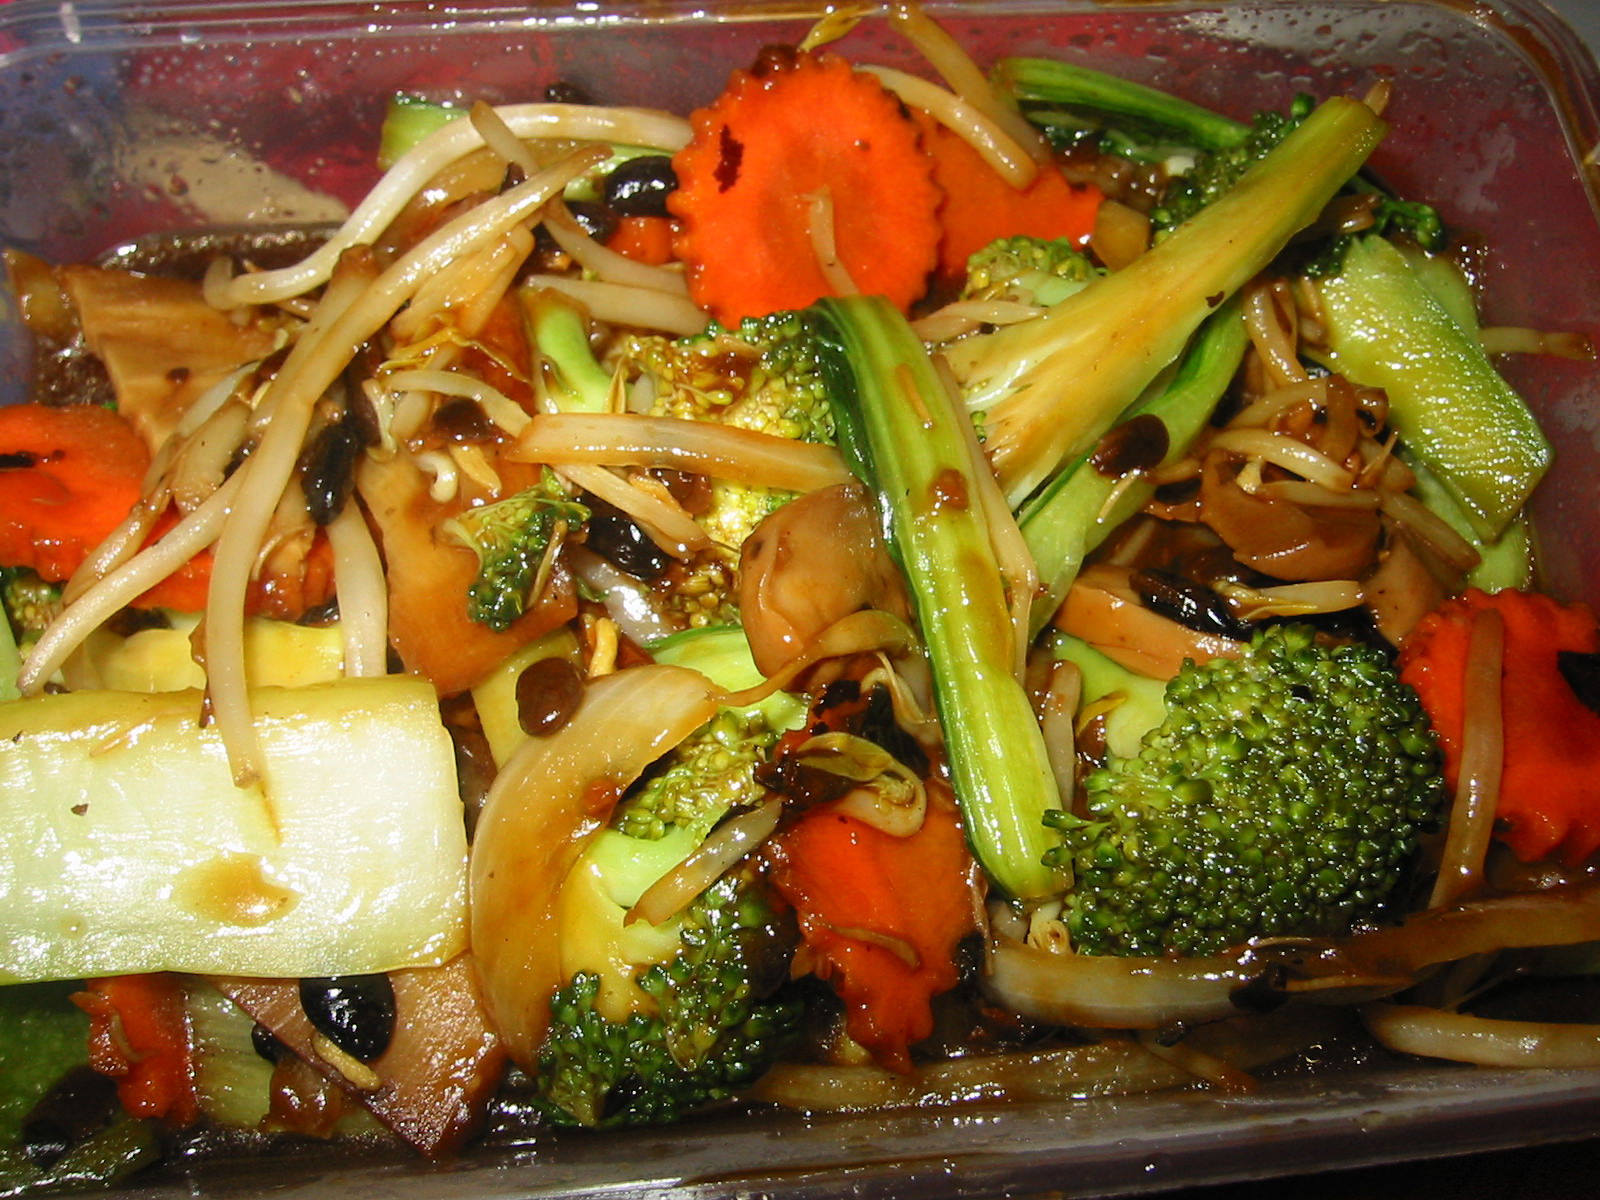 Mixed vegetables in black bean sauce